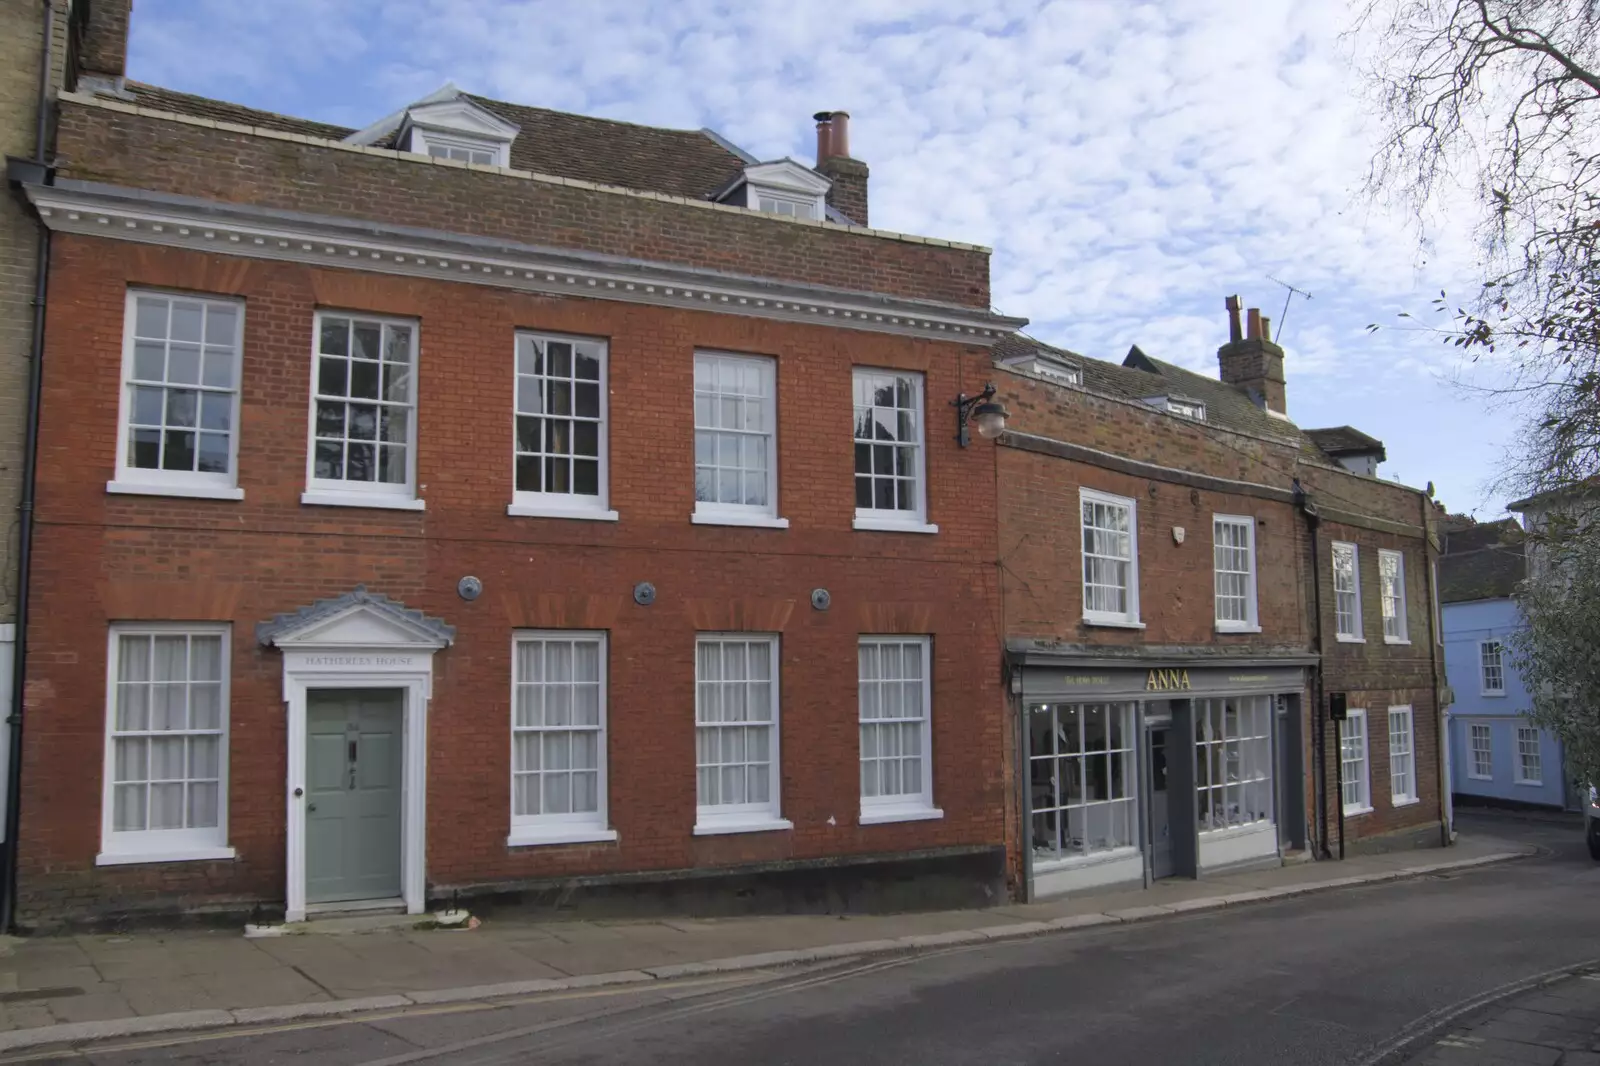 A nice Regency house on Church Street in Woodbridge, from A February Miscellany, Diss and Woodbridge, Suffolk - 3rd February 2024